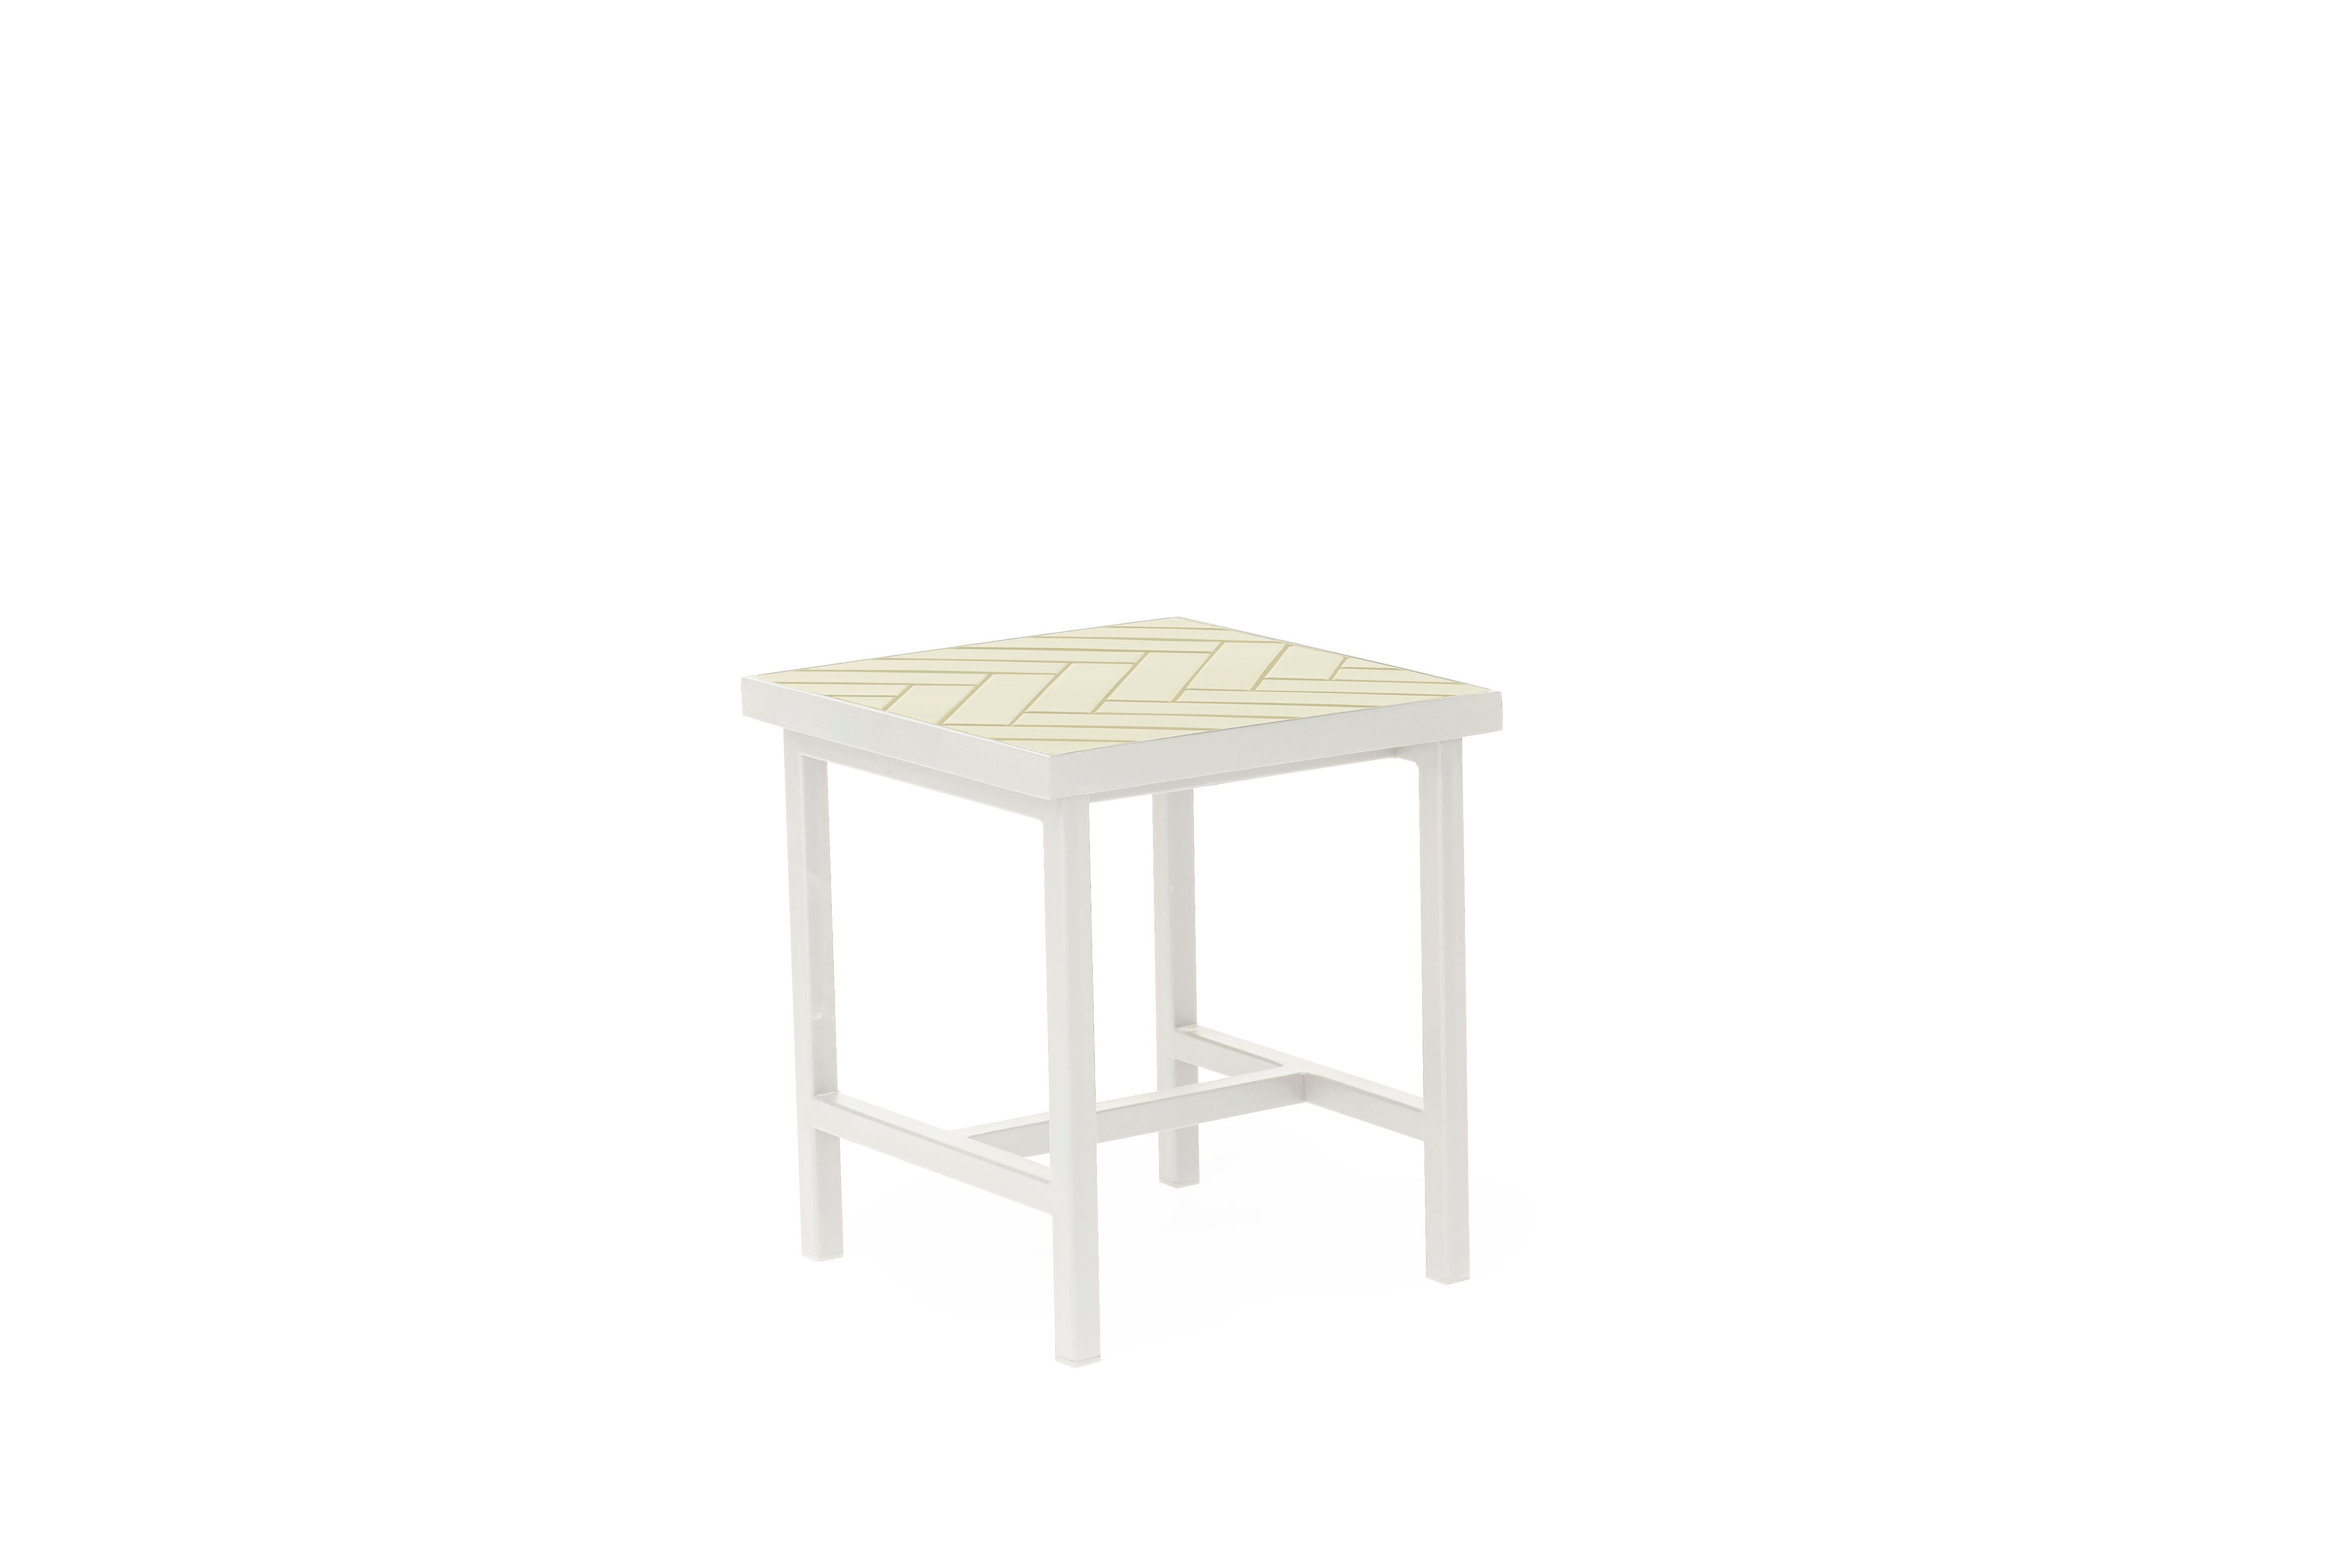 For Sale: Yellow (Butter yellow) Herringbone Side Table, by Charlotte Høncke from Warm Nordic